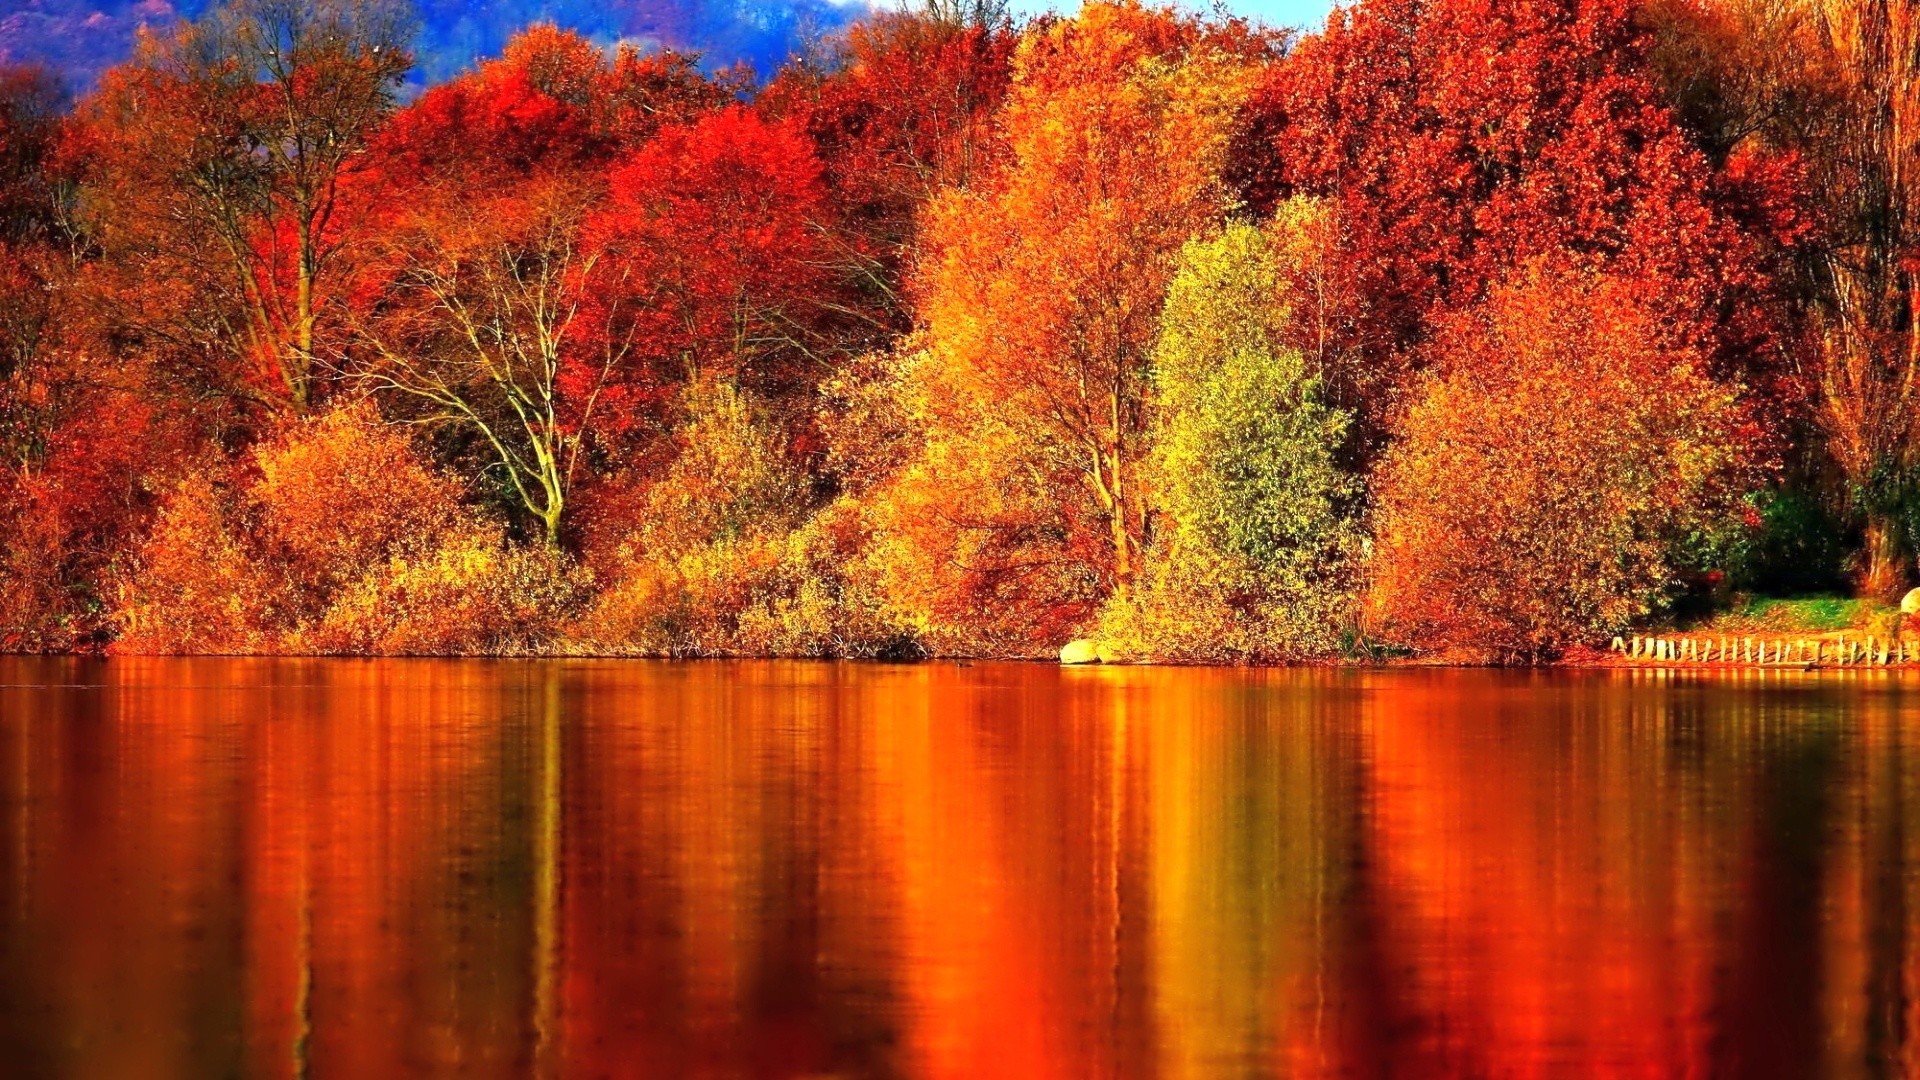 1920x1080 0 Autumn Wallpapers Download Group Autumn Wallpapers Download Group